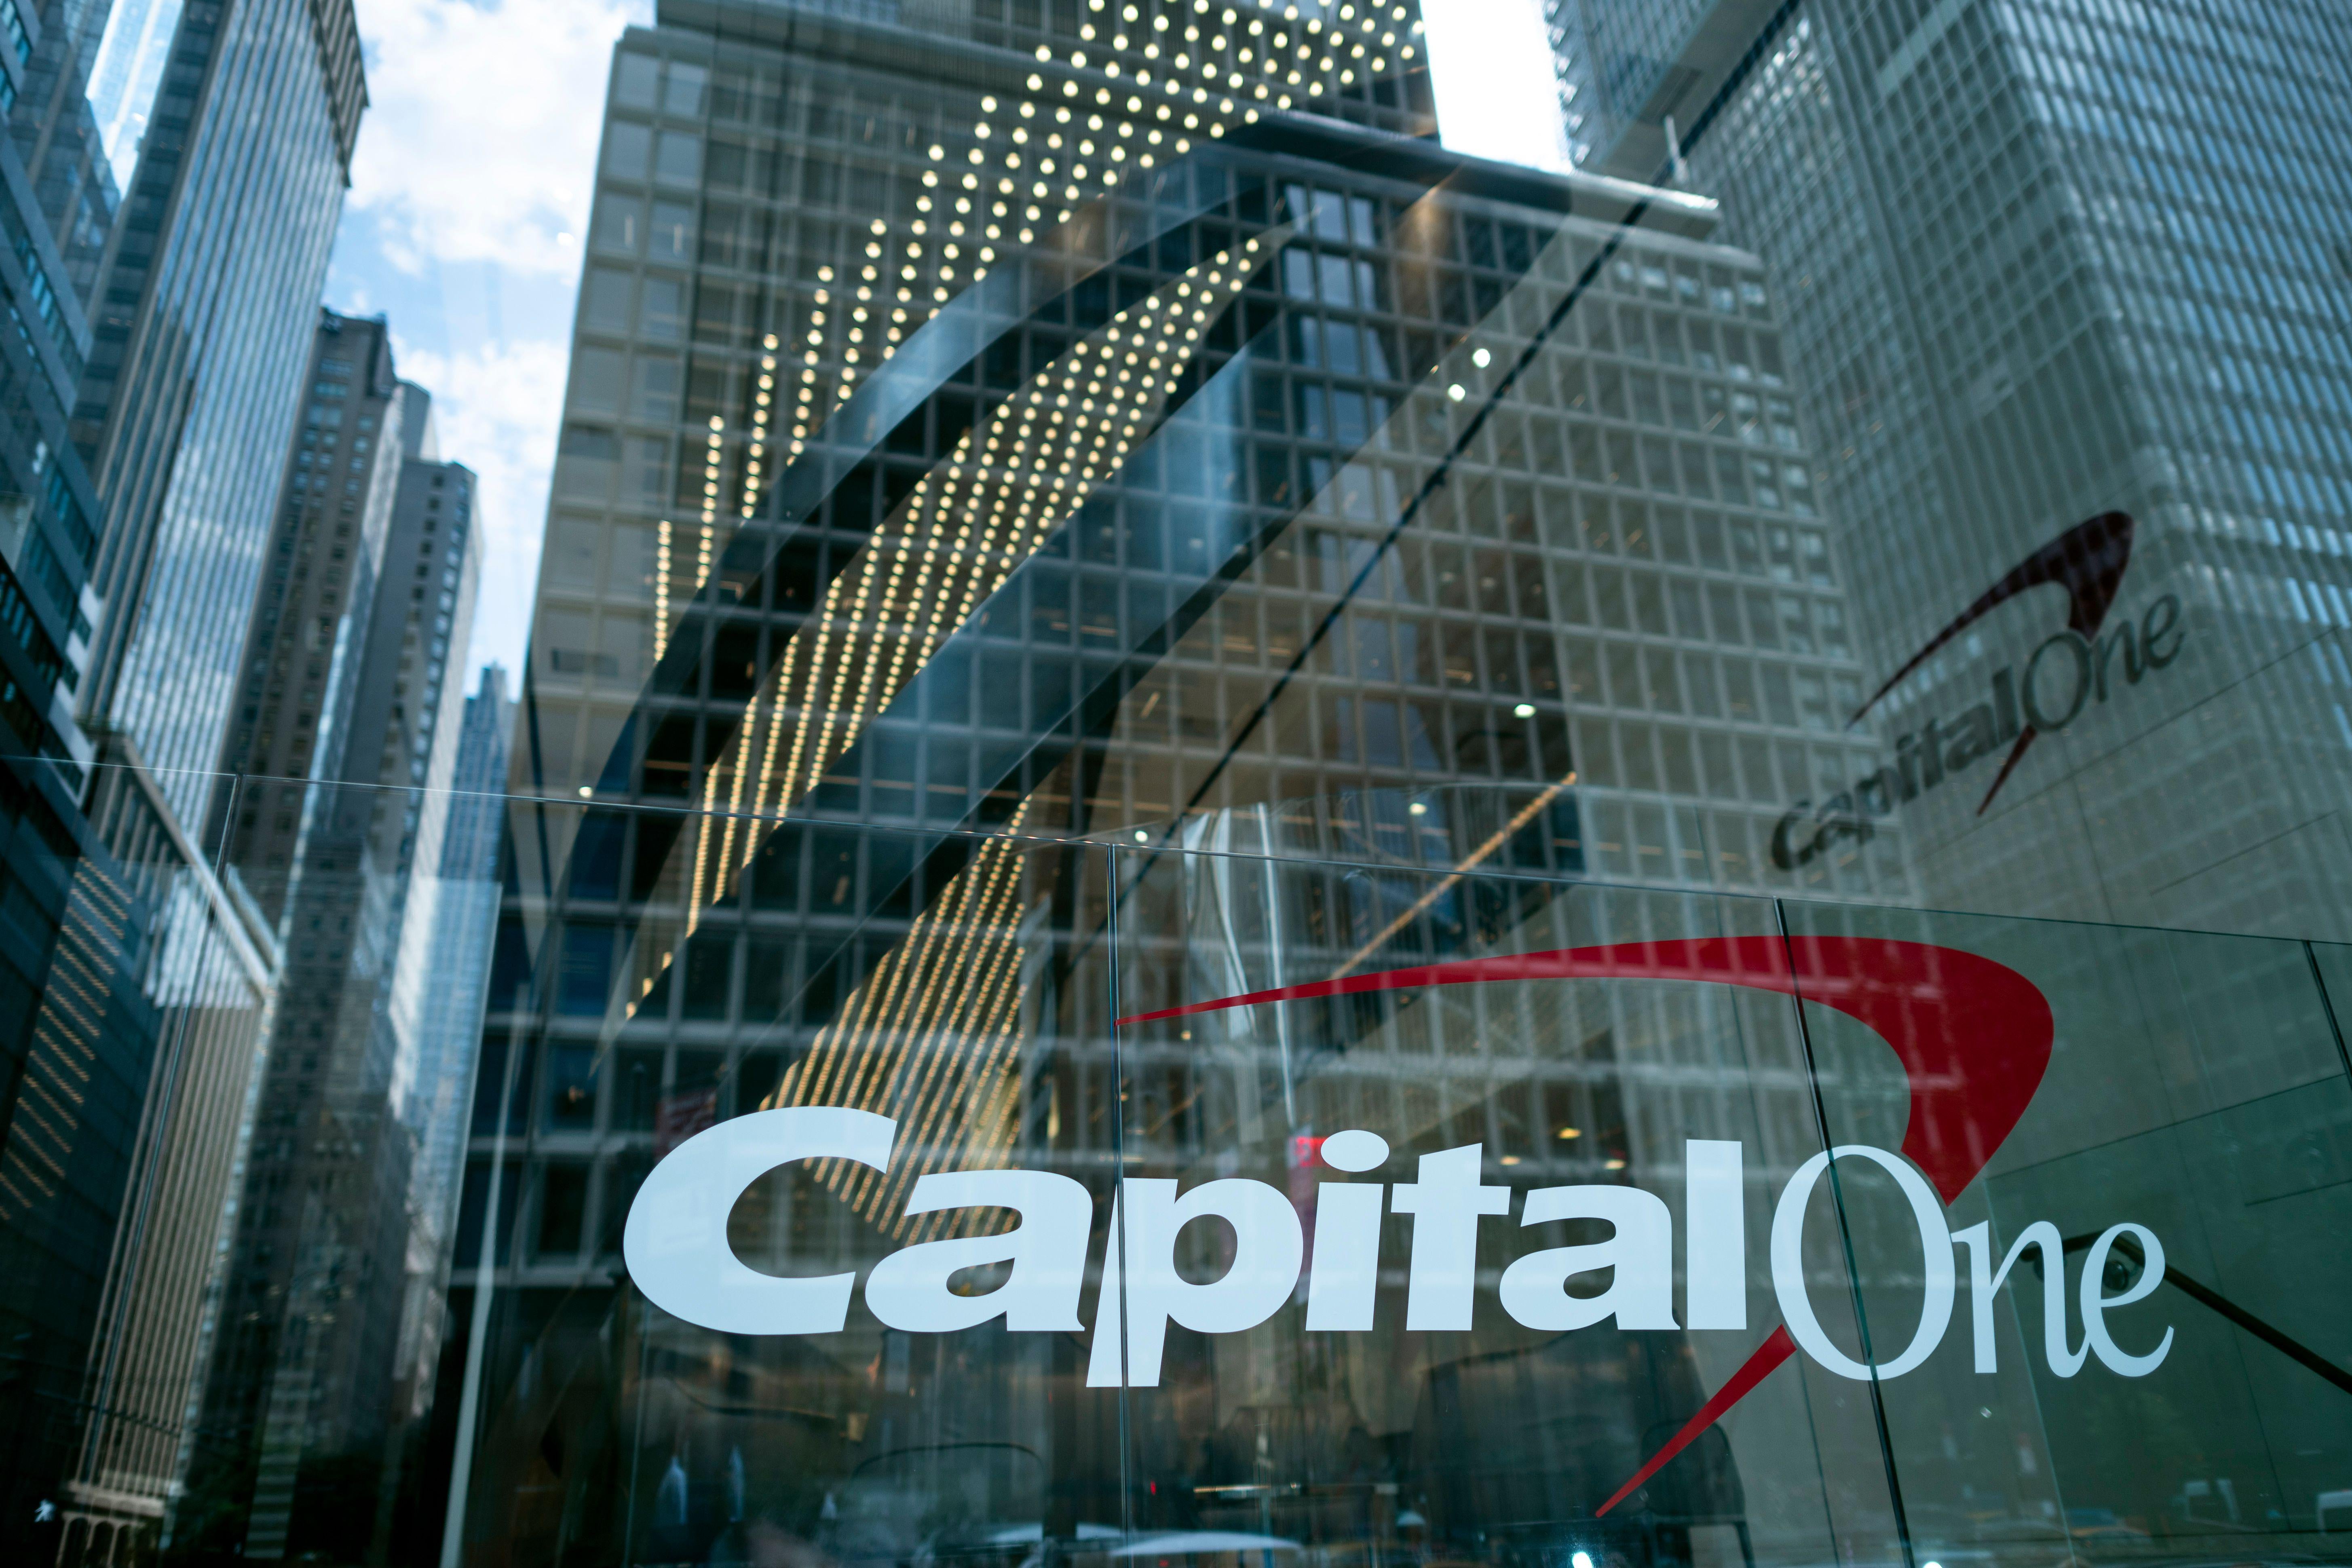 The Capital One Bank Headquarters is pictured on  July 30, 2019 in New York City. - A hacker accessed more than 100 million credit card applications with US financial heavyweight Capital One, the firm said on July 29, 2019, in one of the biggest data thefts to hit a financial services company. FBI agents arrested Paige Thompson, 33, a former Seattle technology company software engineer, after she boasted about the data theft on the information sharing site GitHub, authorities said. (Photo by Johannes EISELE / AFP)        (Photo credit should read JOHANNES EISELE/AFP/Getty Images)